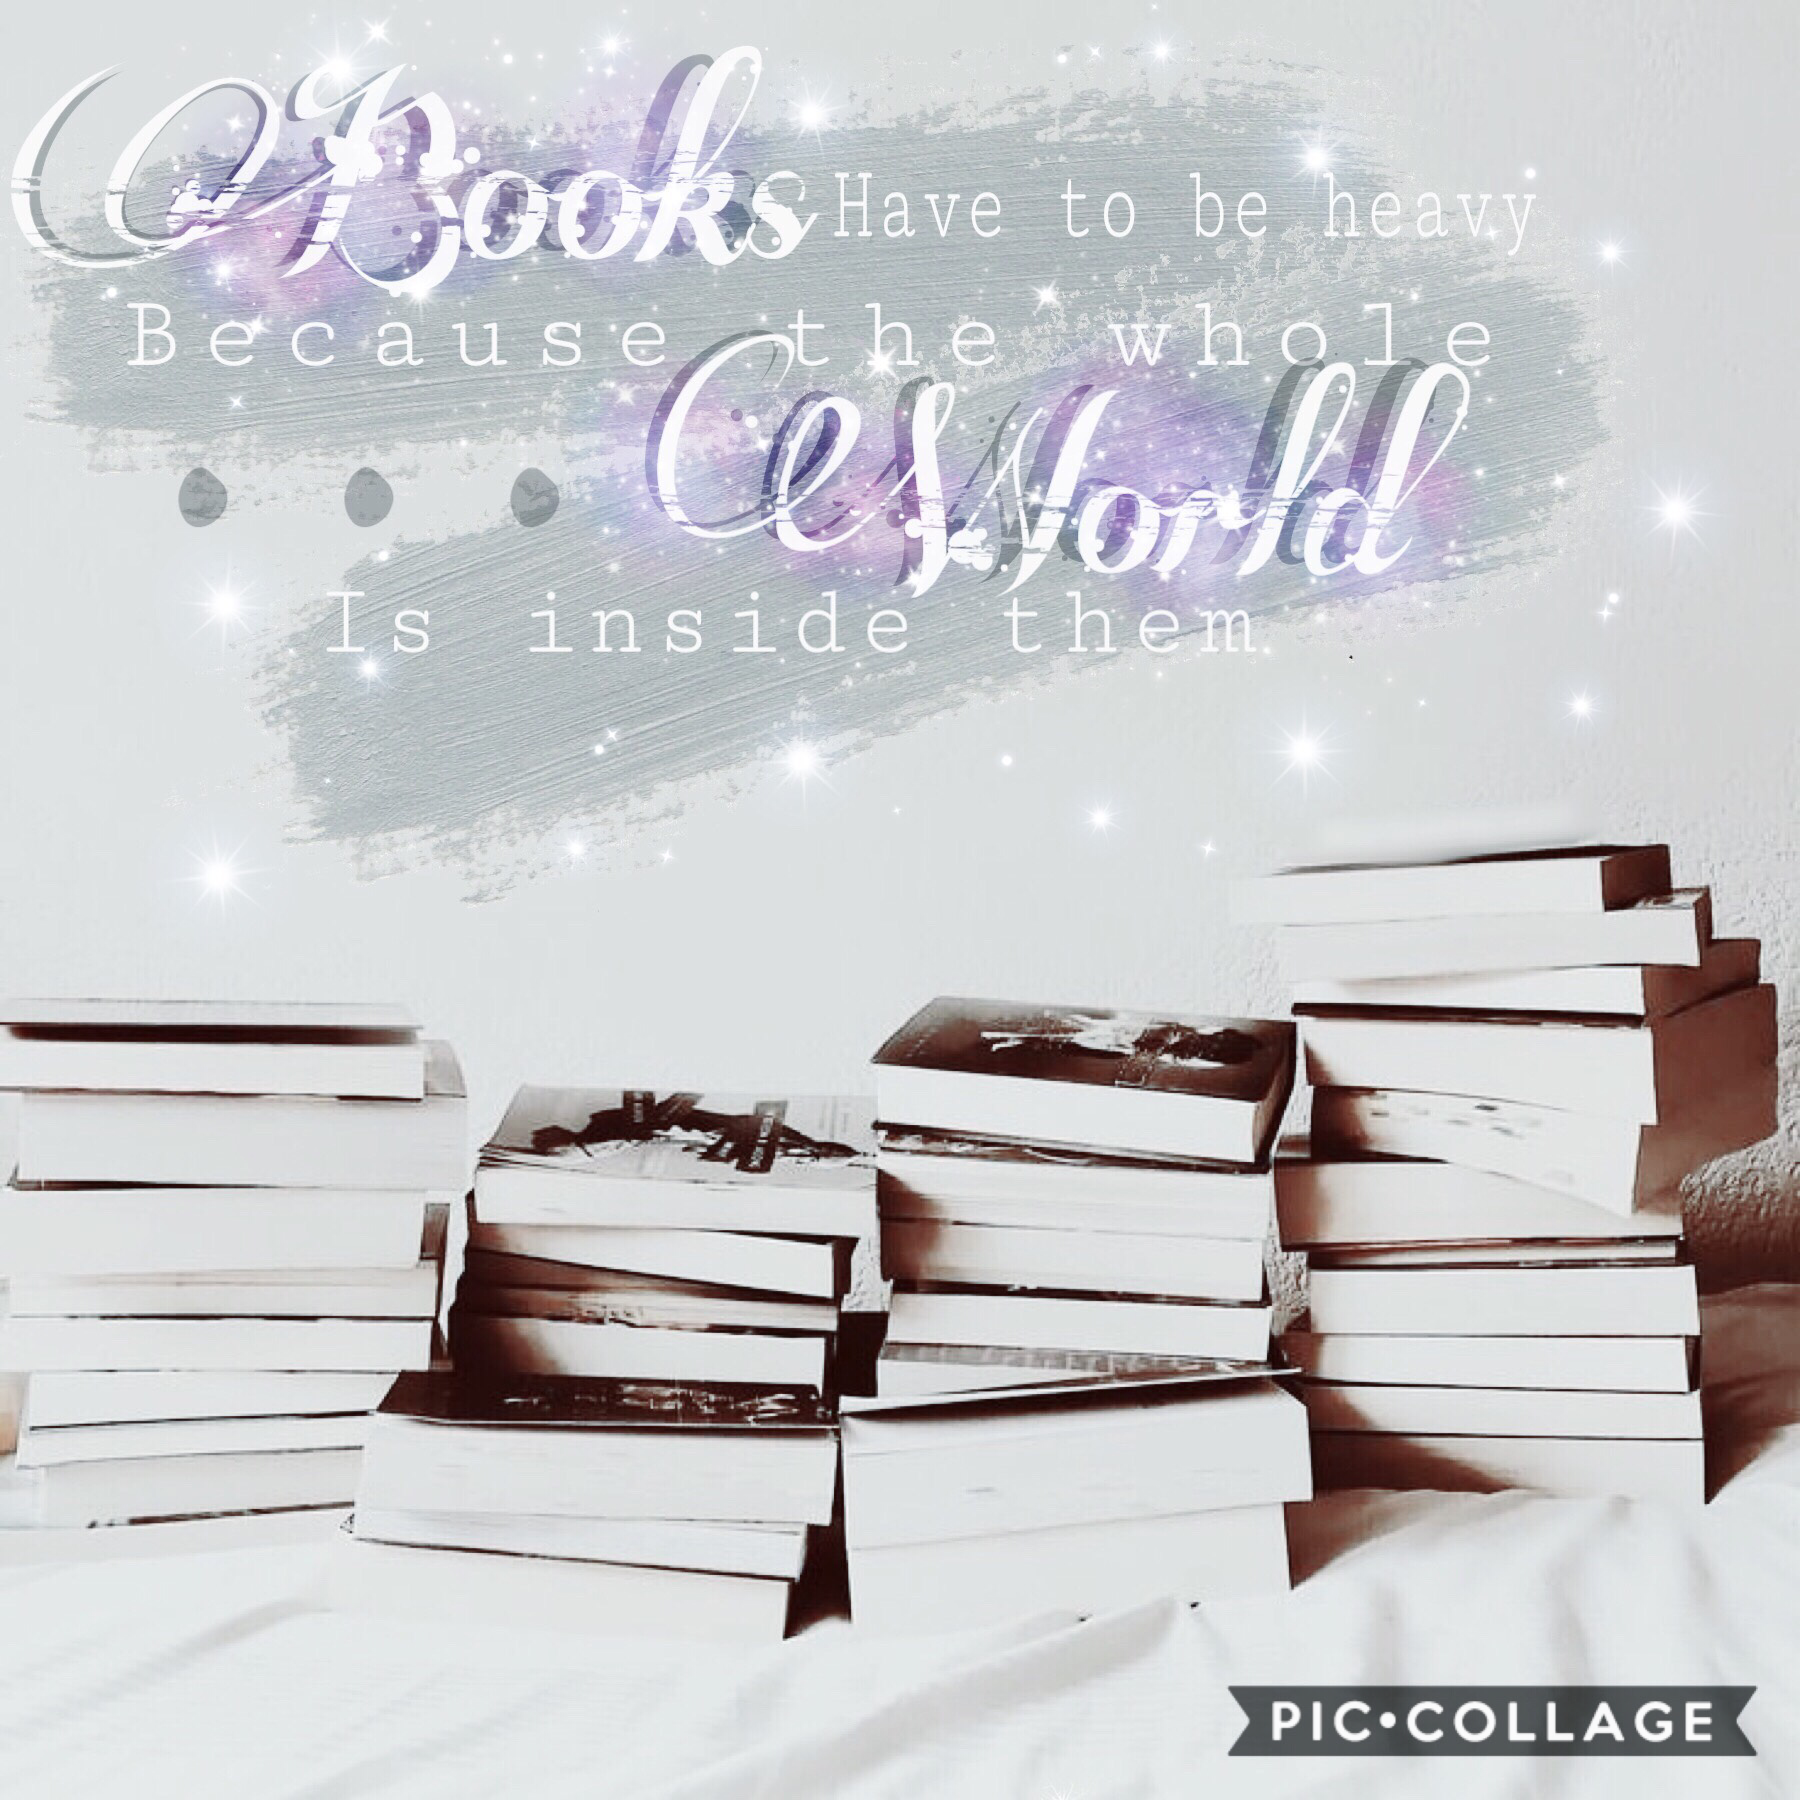 What are your favorite books?